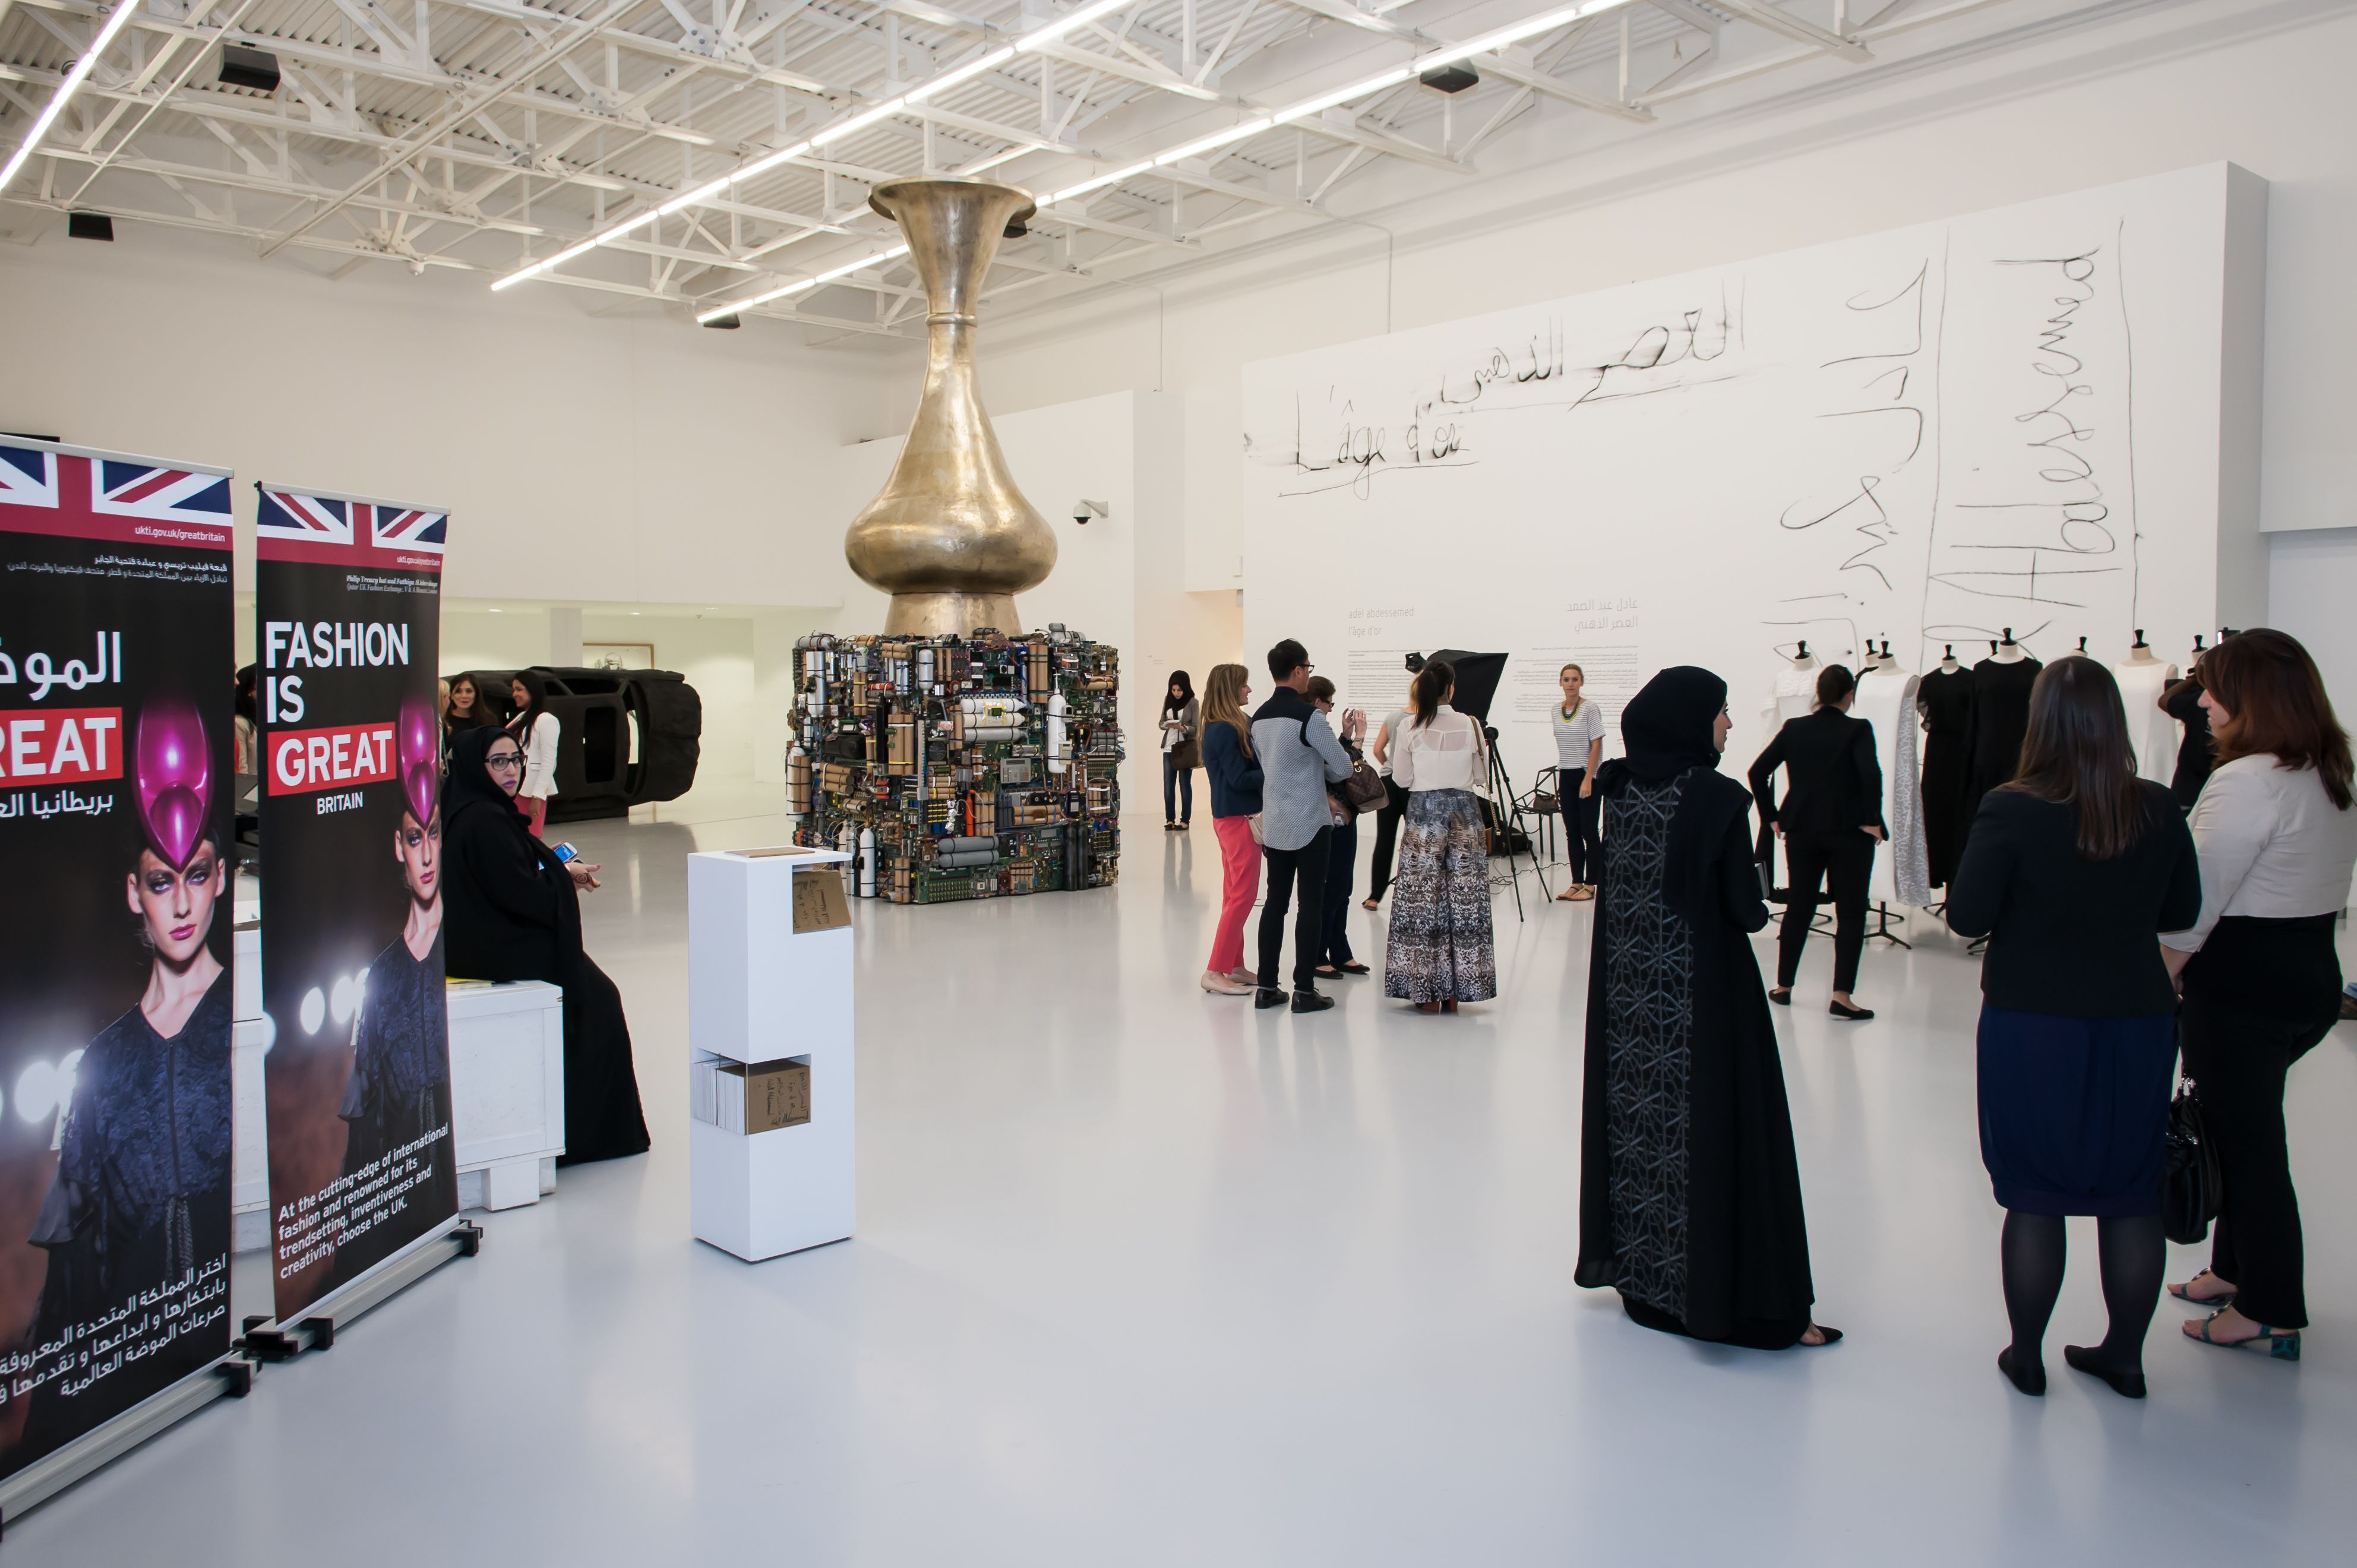 The exhibition space of Qatar-Uk 2013 Fashion Exchange, promoting contemporary fashion designers in both Qatar and the UK.